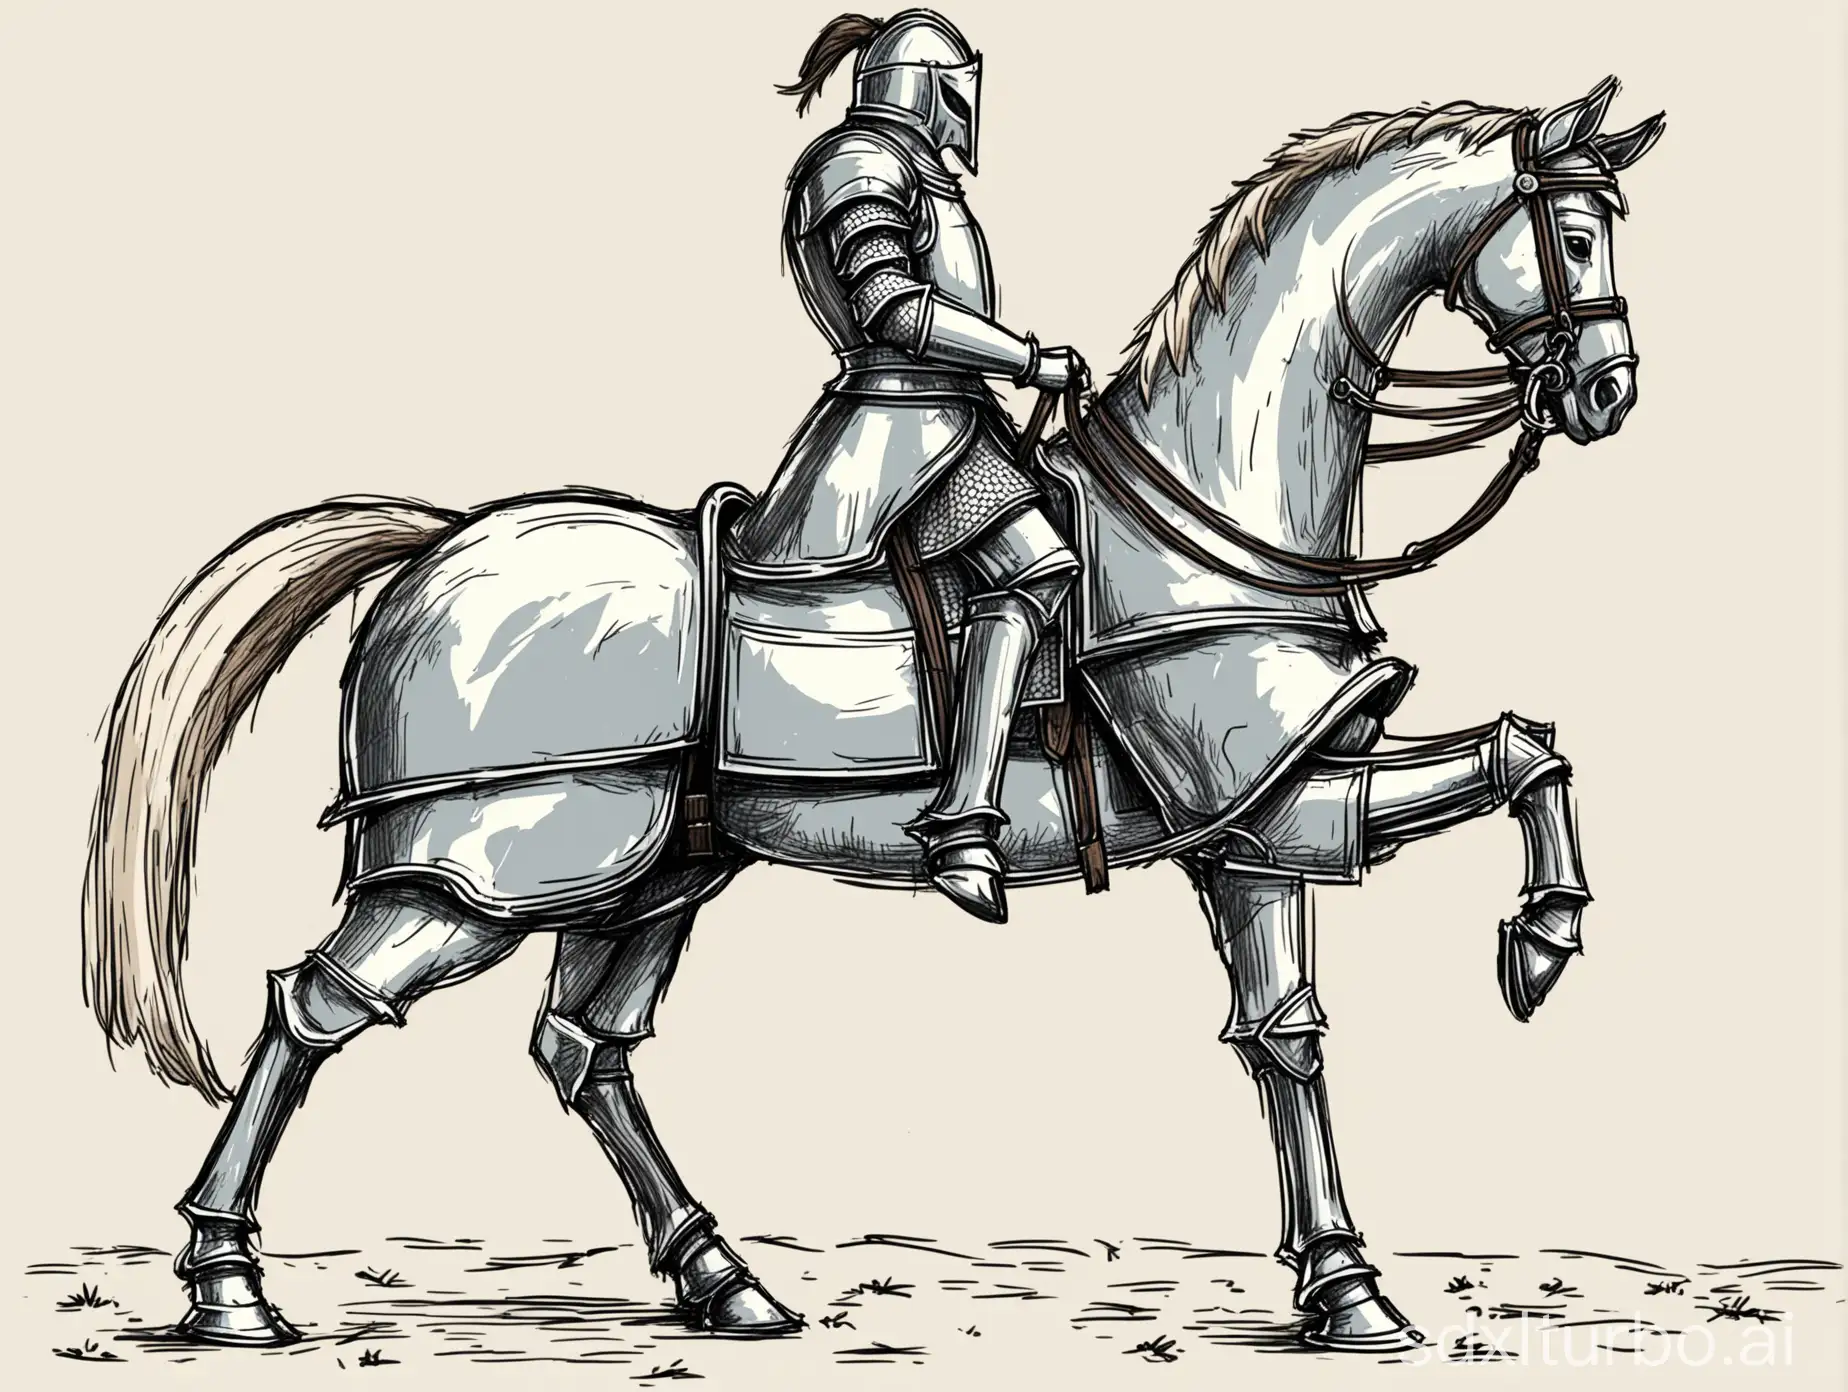 draw a horse standing on the ground with its head raised, in full growth, side. one hoof lifted. drawing style - quick sketch add a knight in armor, who holds the reins on the horse